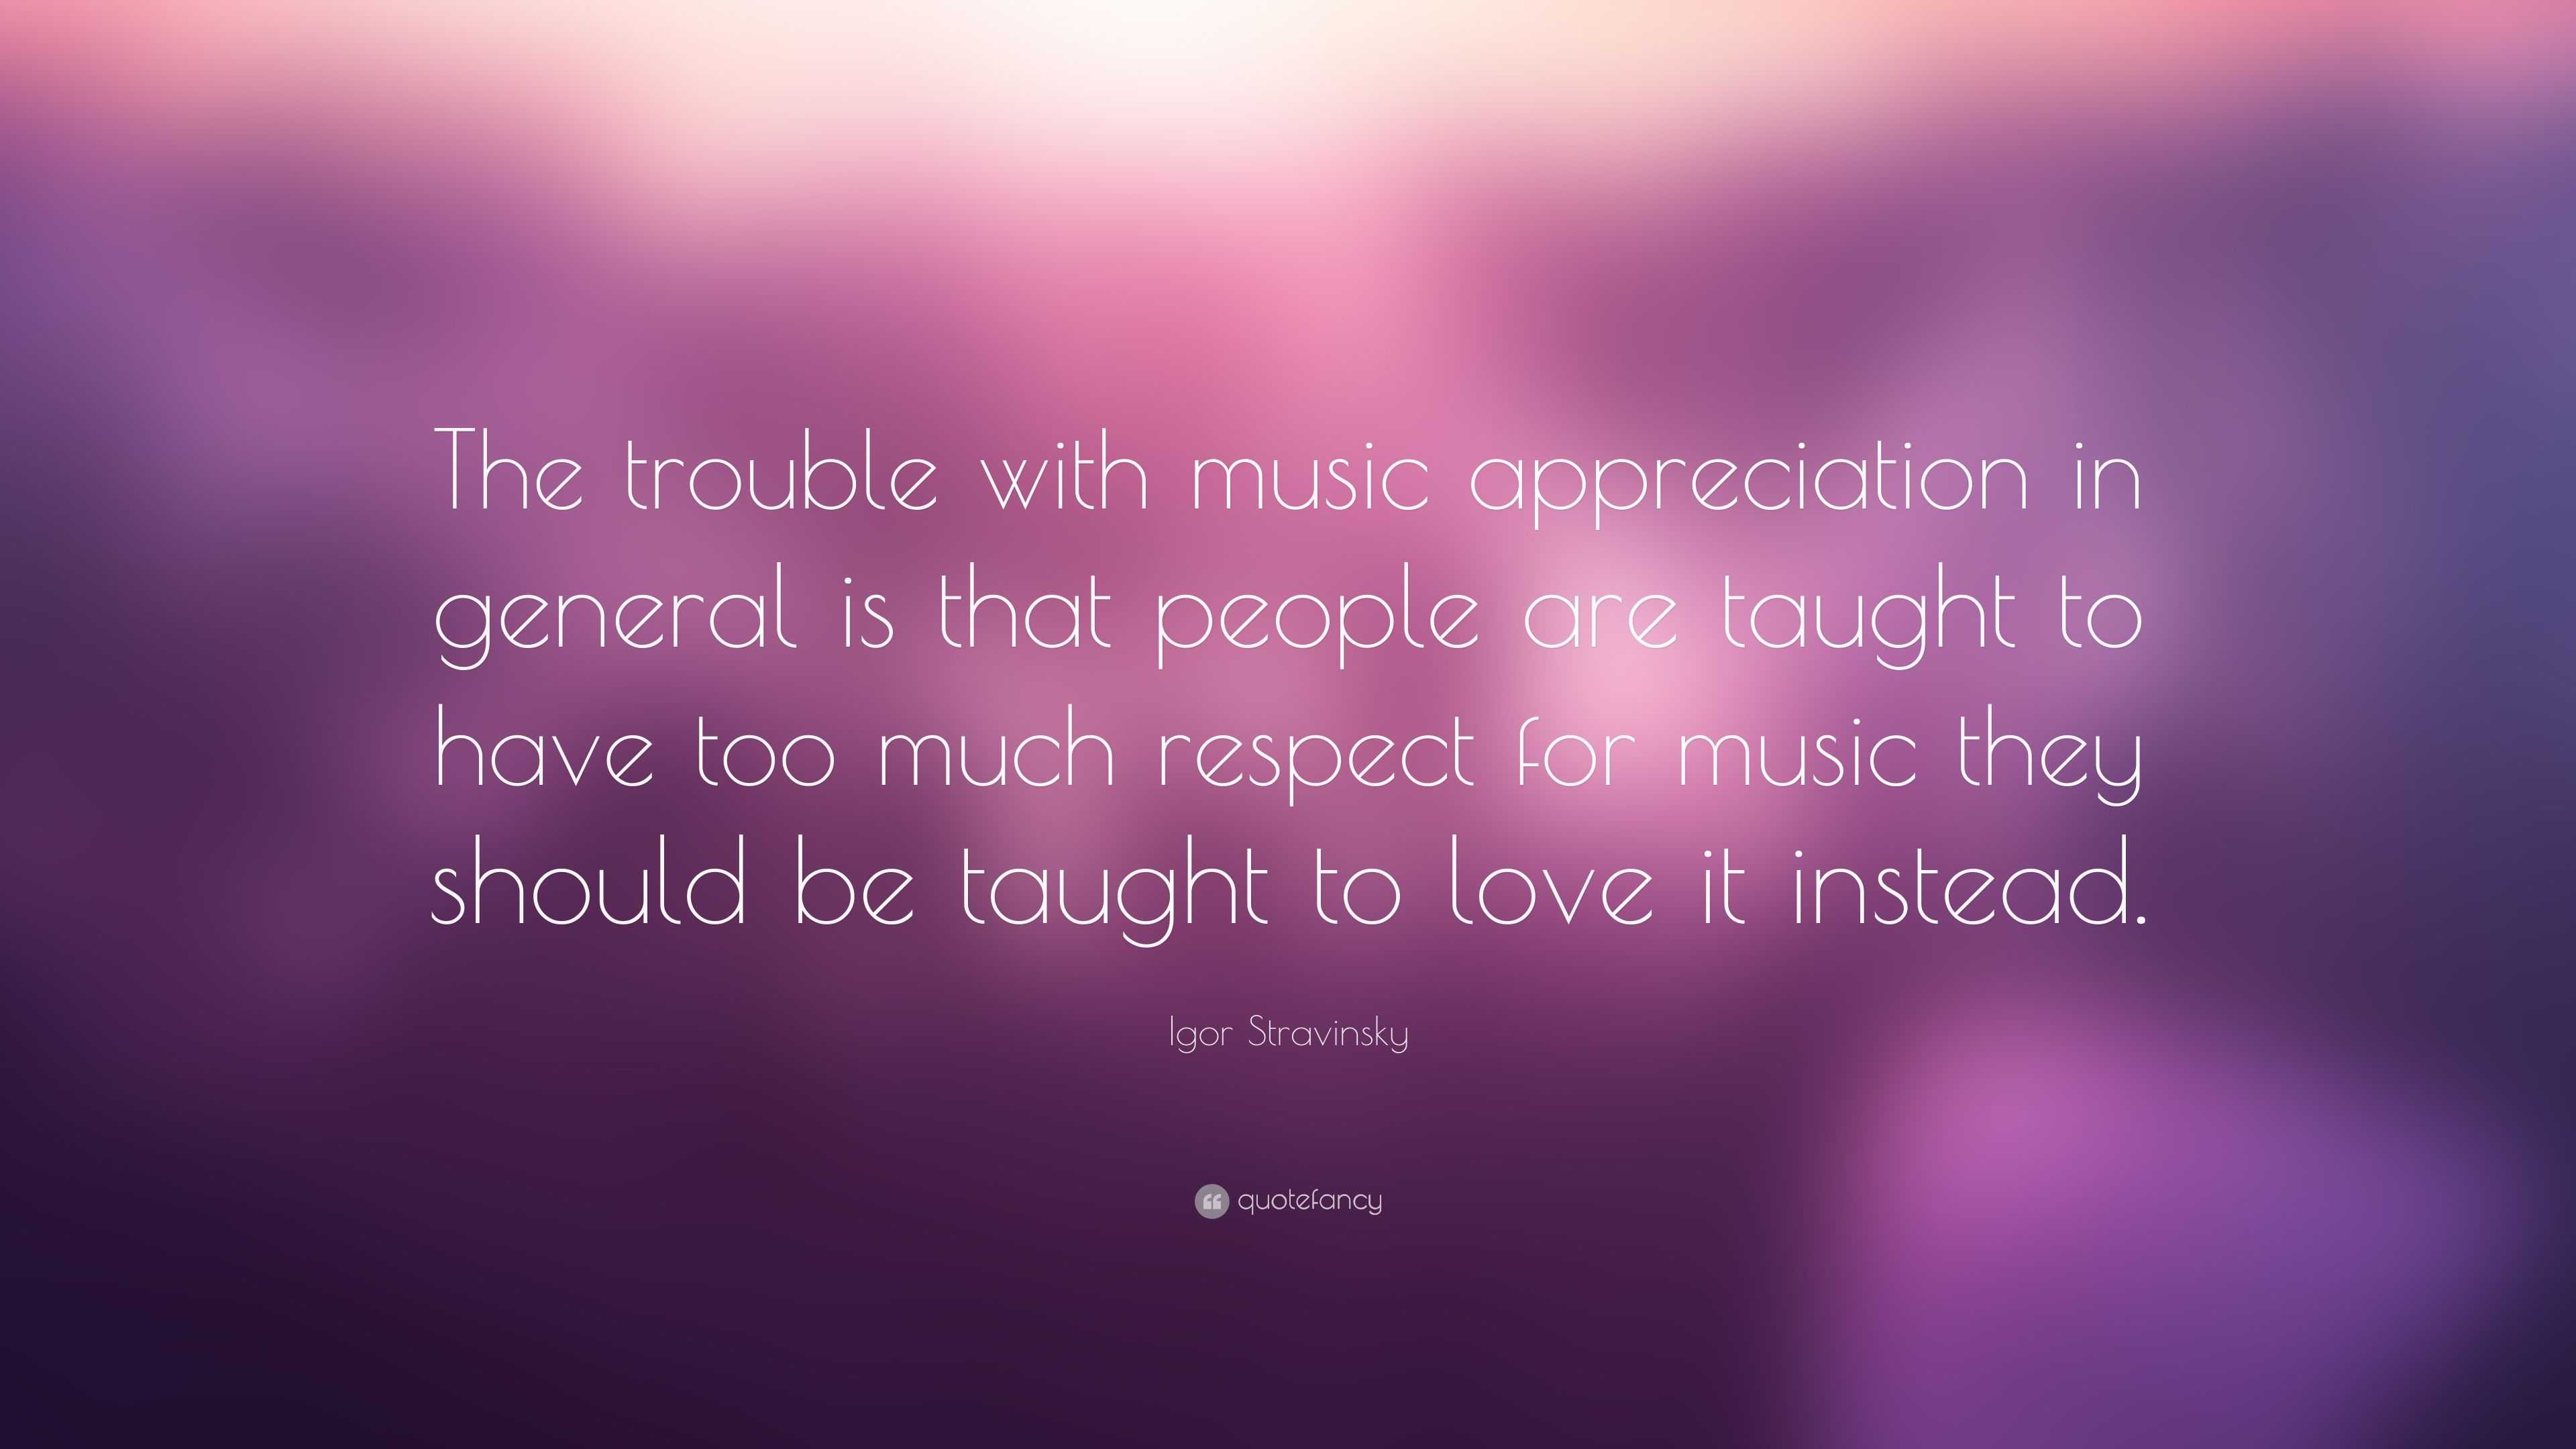 Igor Stravinsky Quote: “The trouble with music appreciation in general ...